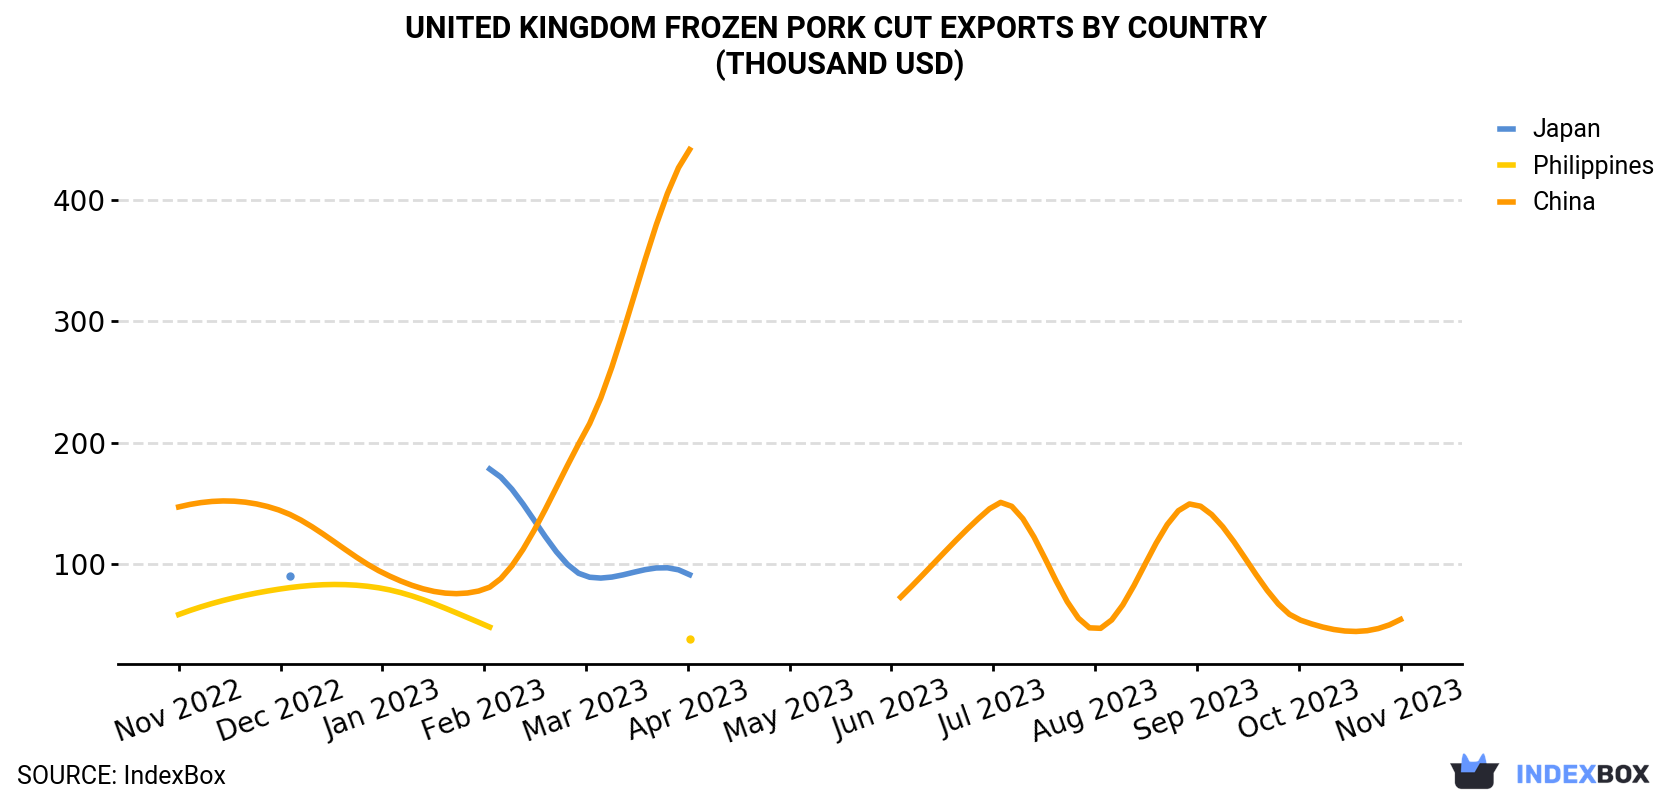 United Kingdom Frozen Pork Cut Exports By Country (Thousand USD)